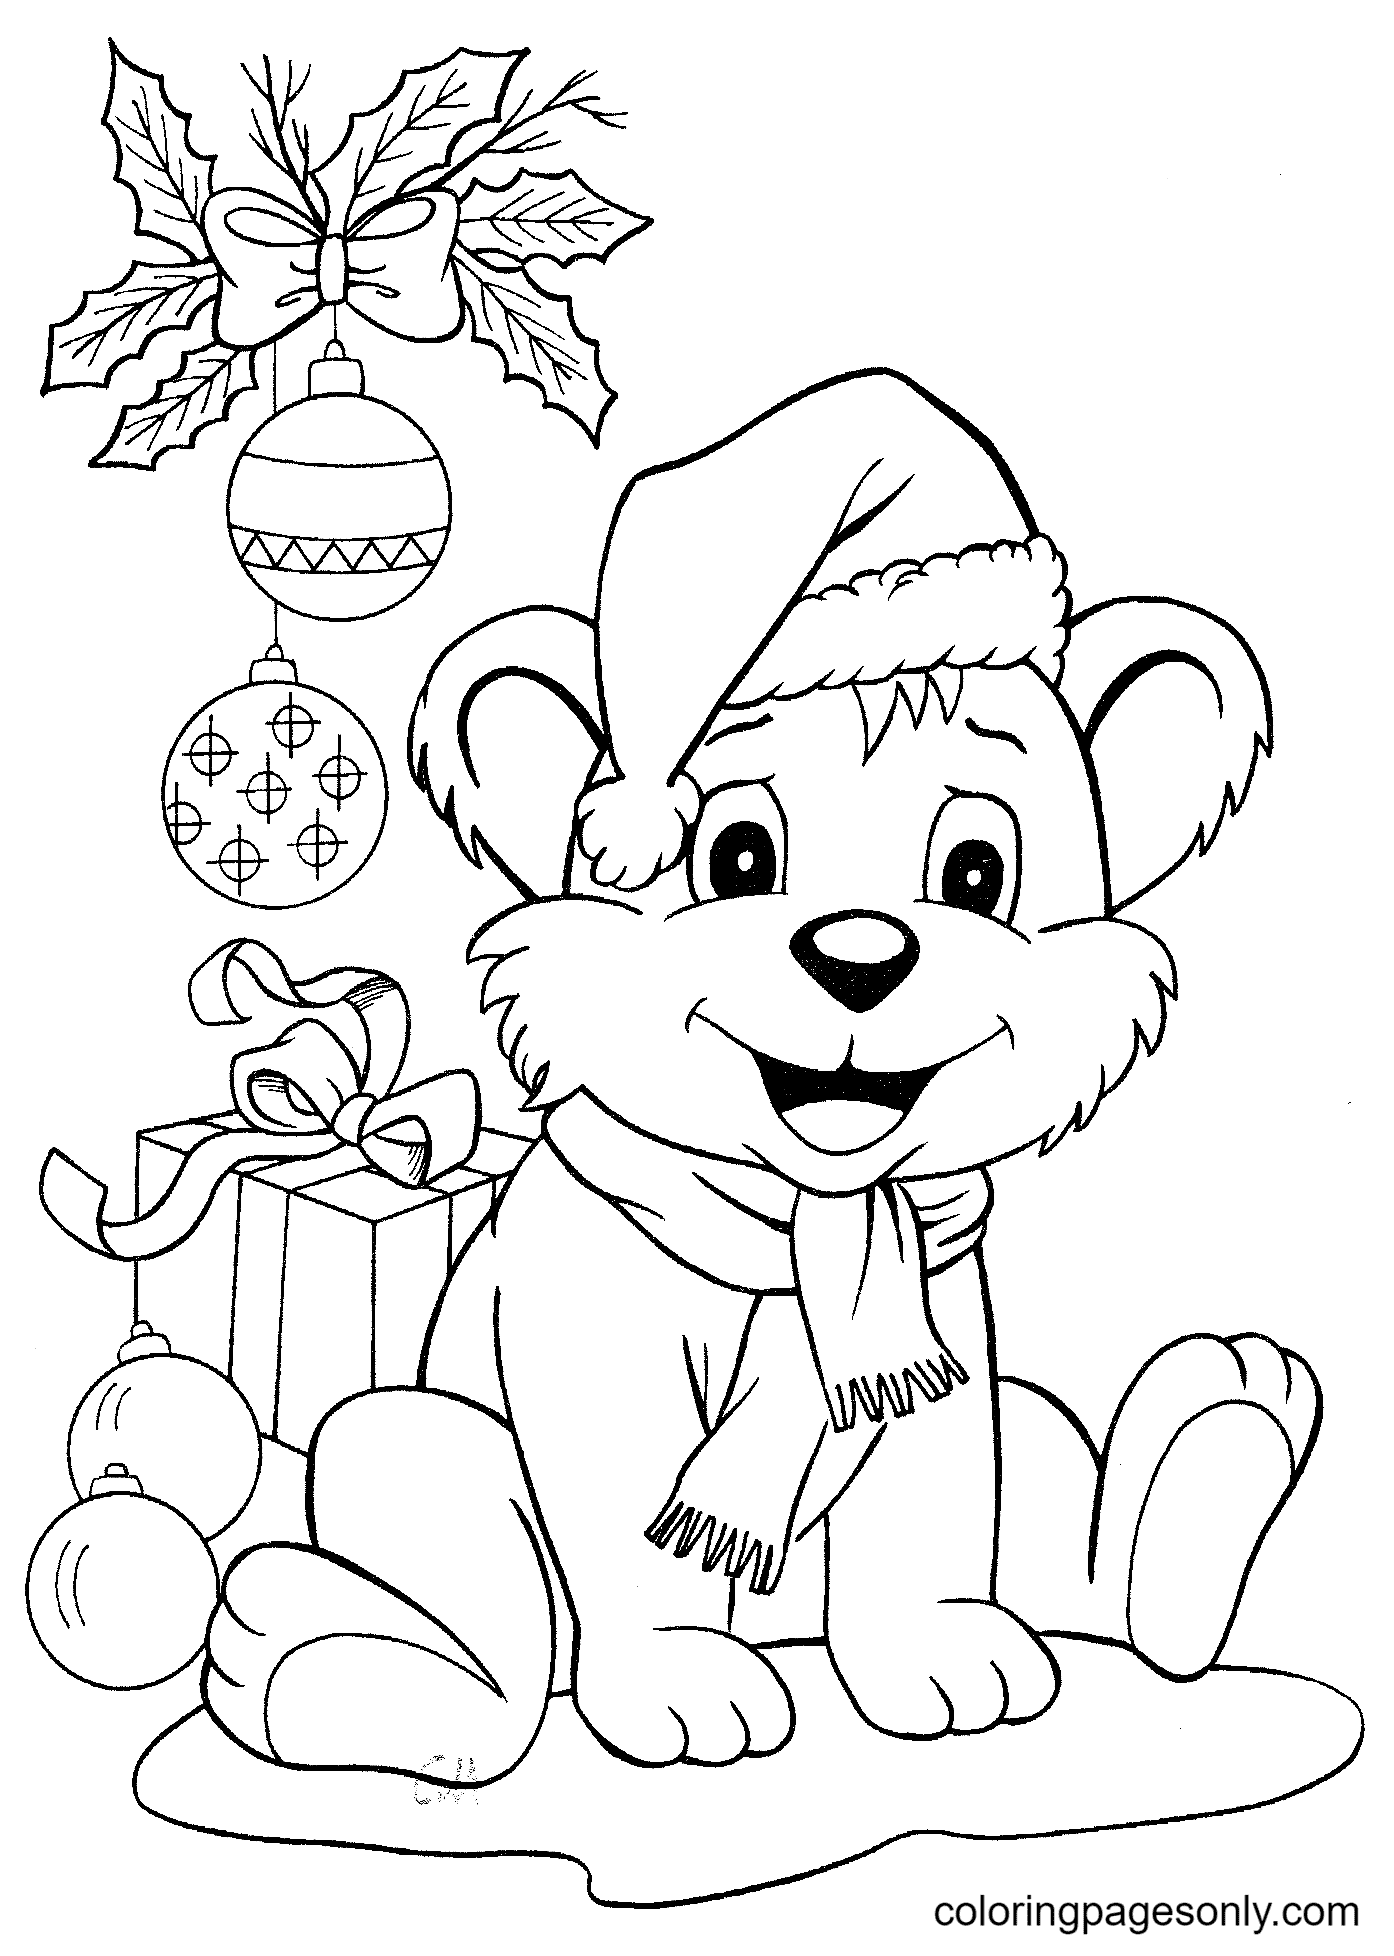 Christmas Puppy Coloring Pages   Christmas Animals Coloring Pages ...